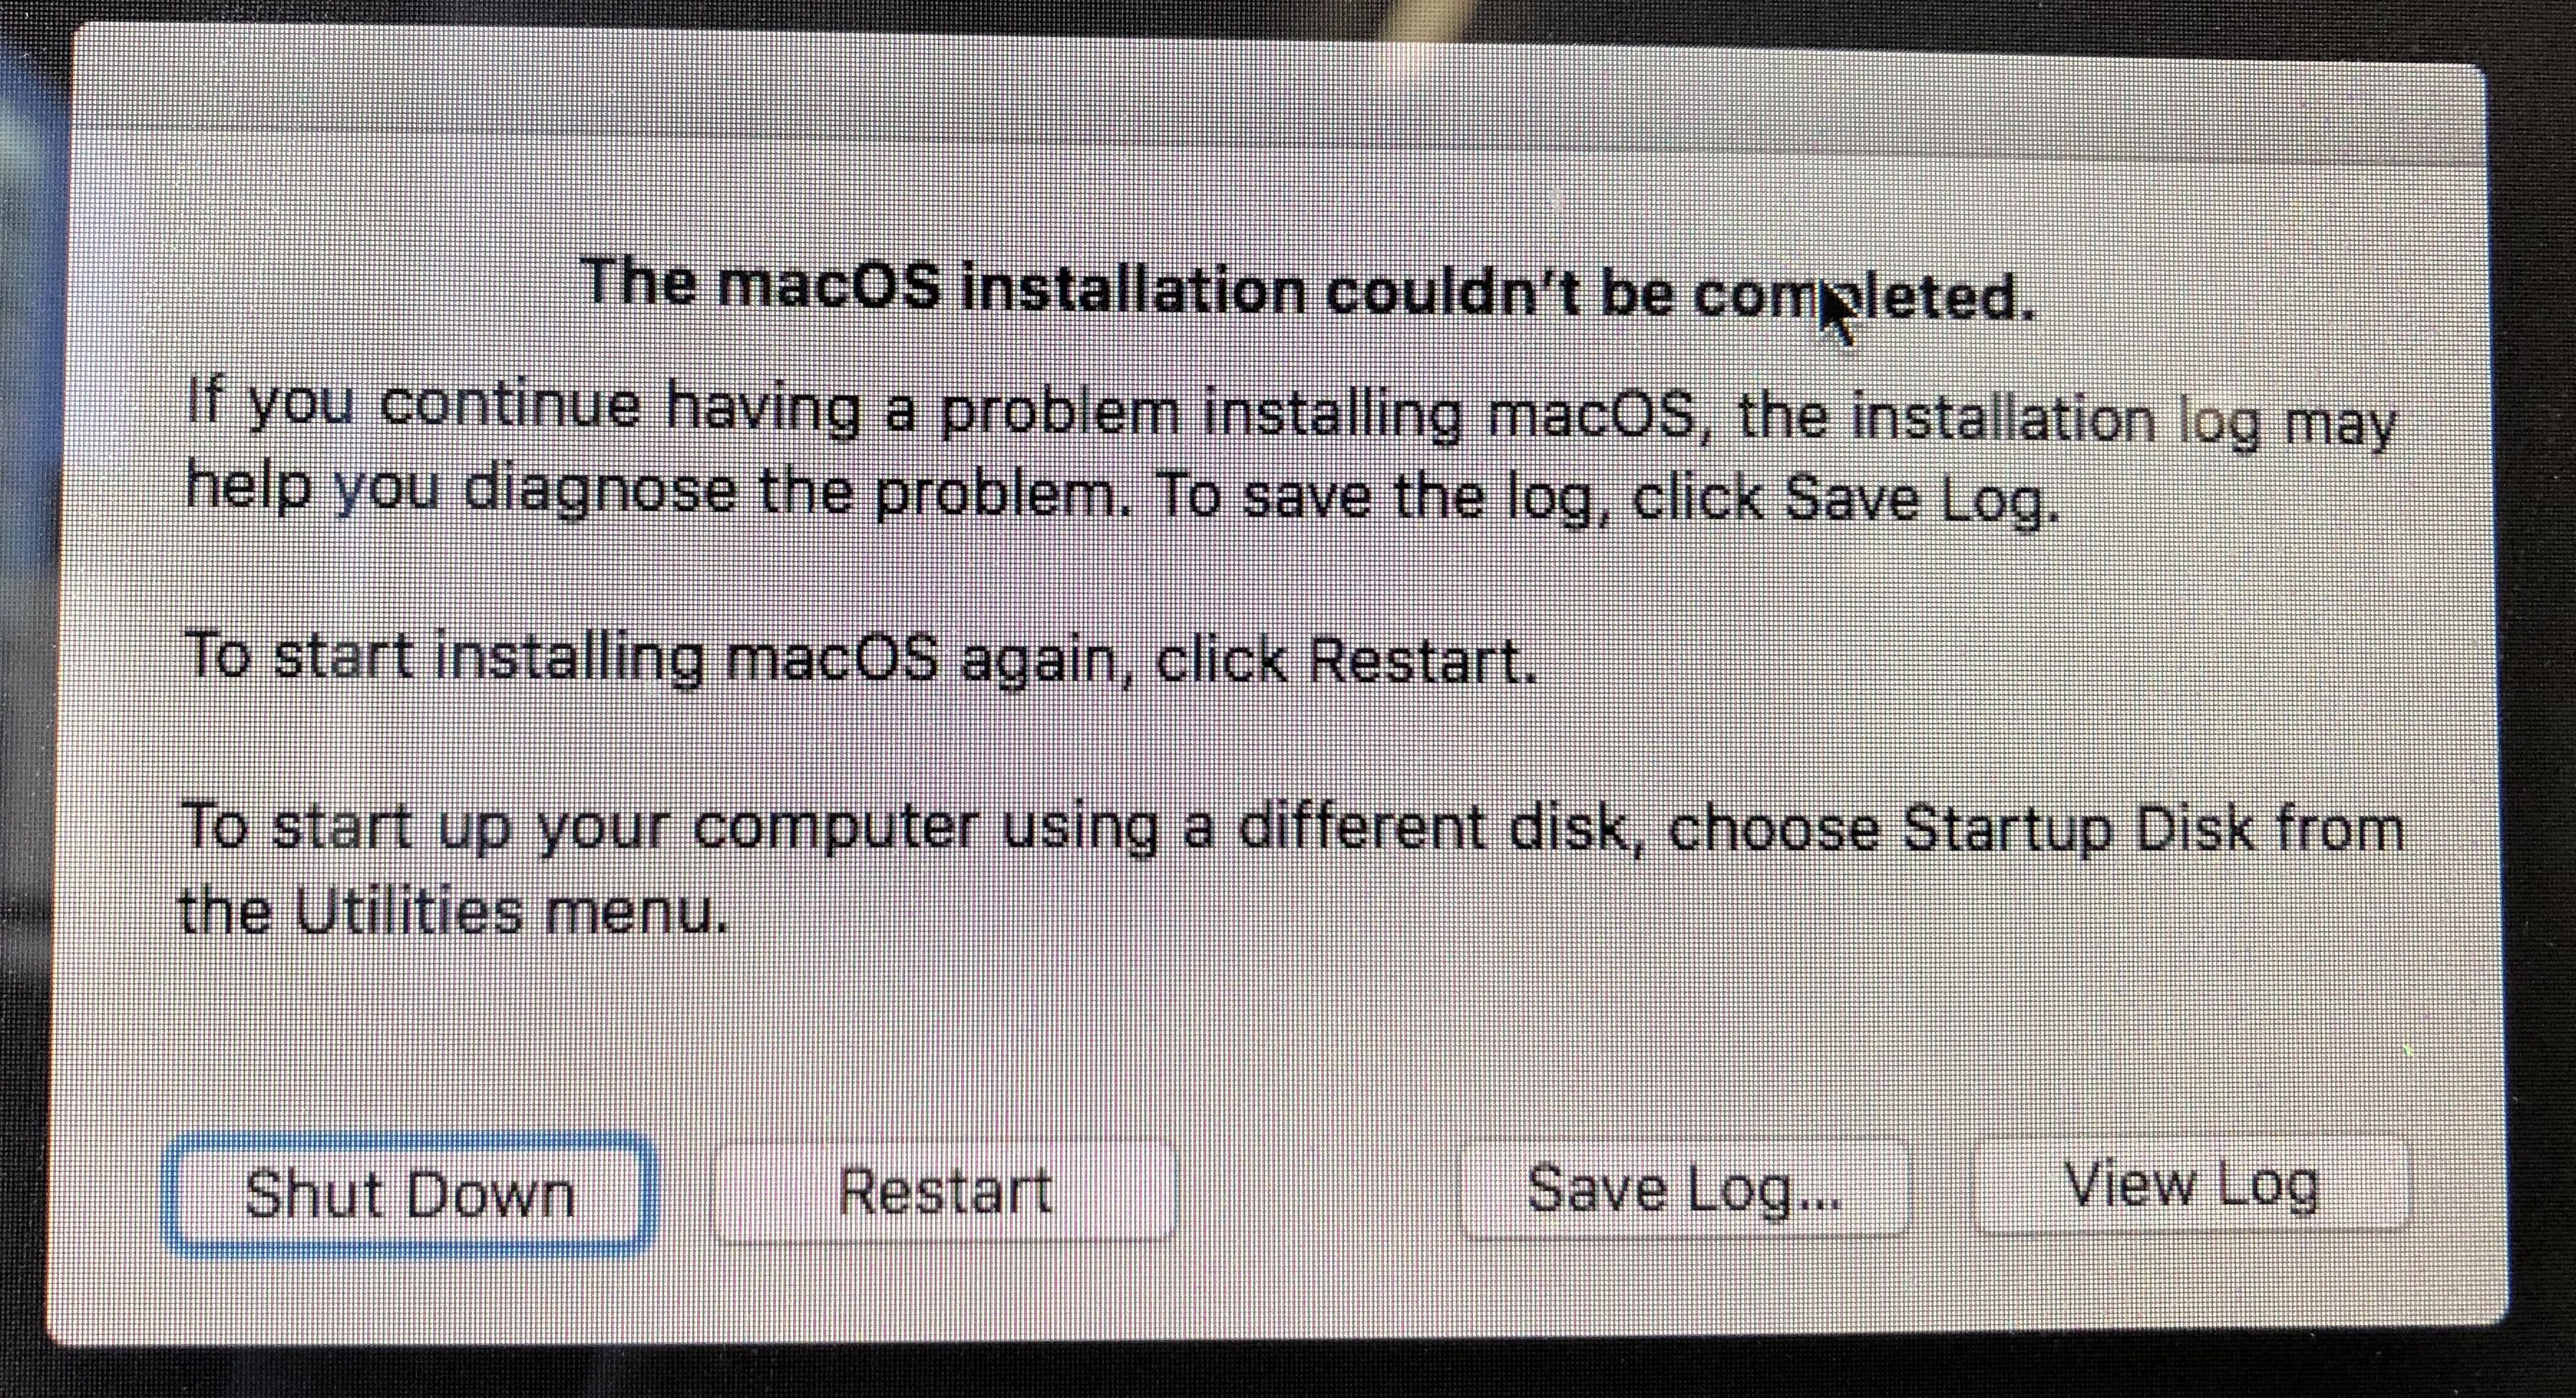 macOS installation could not be completed